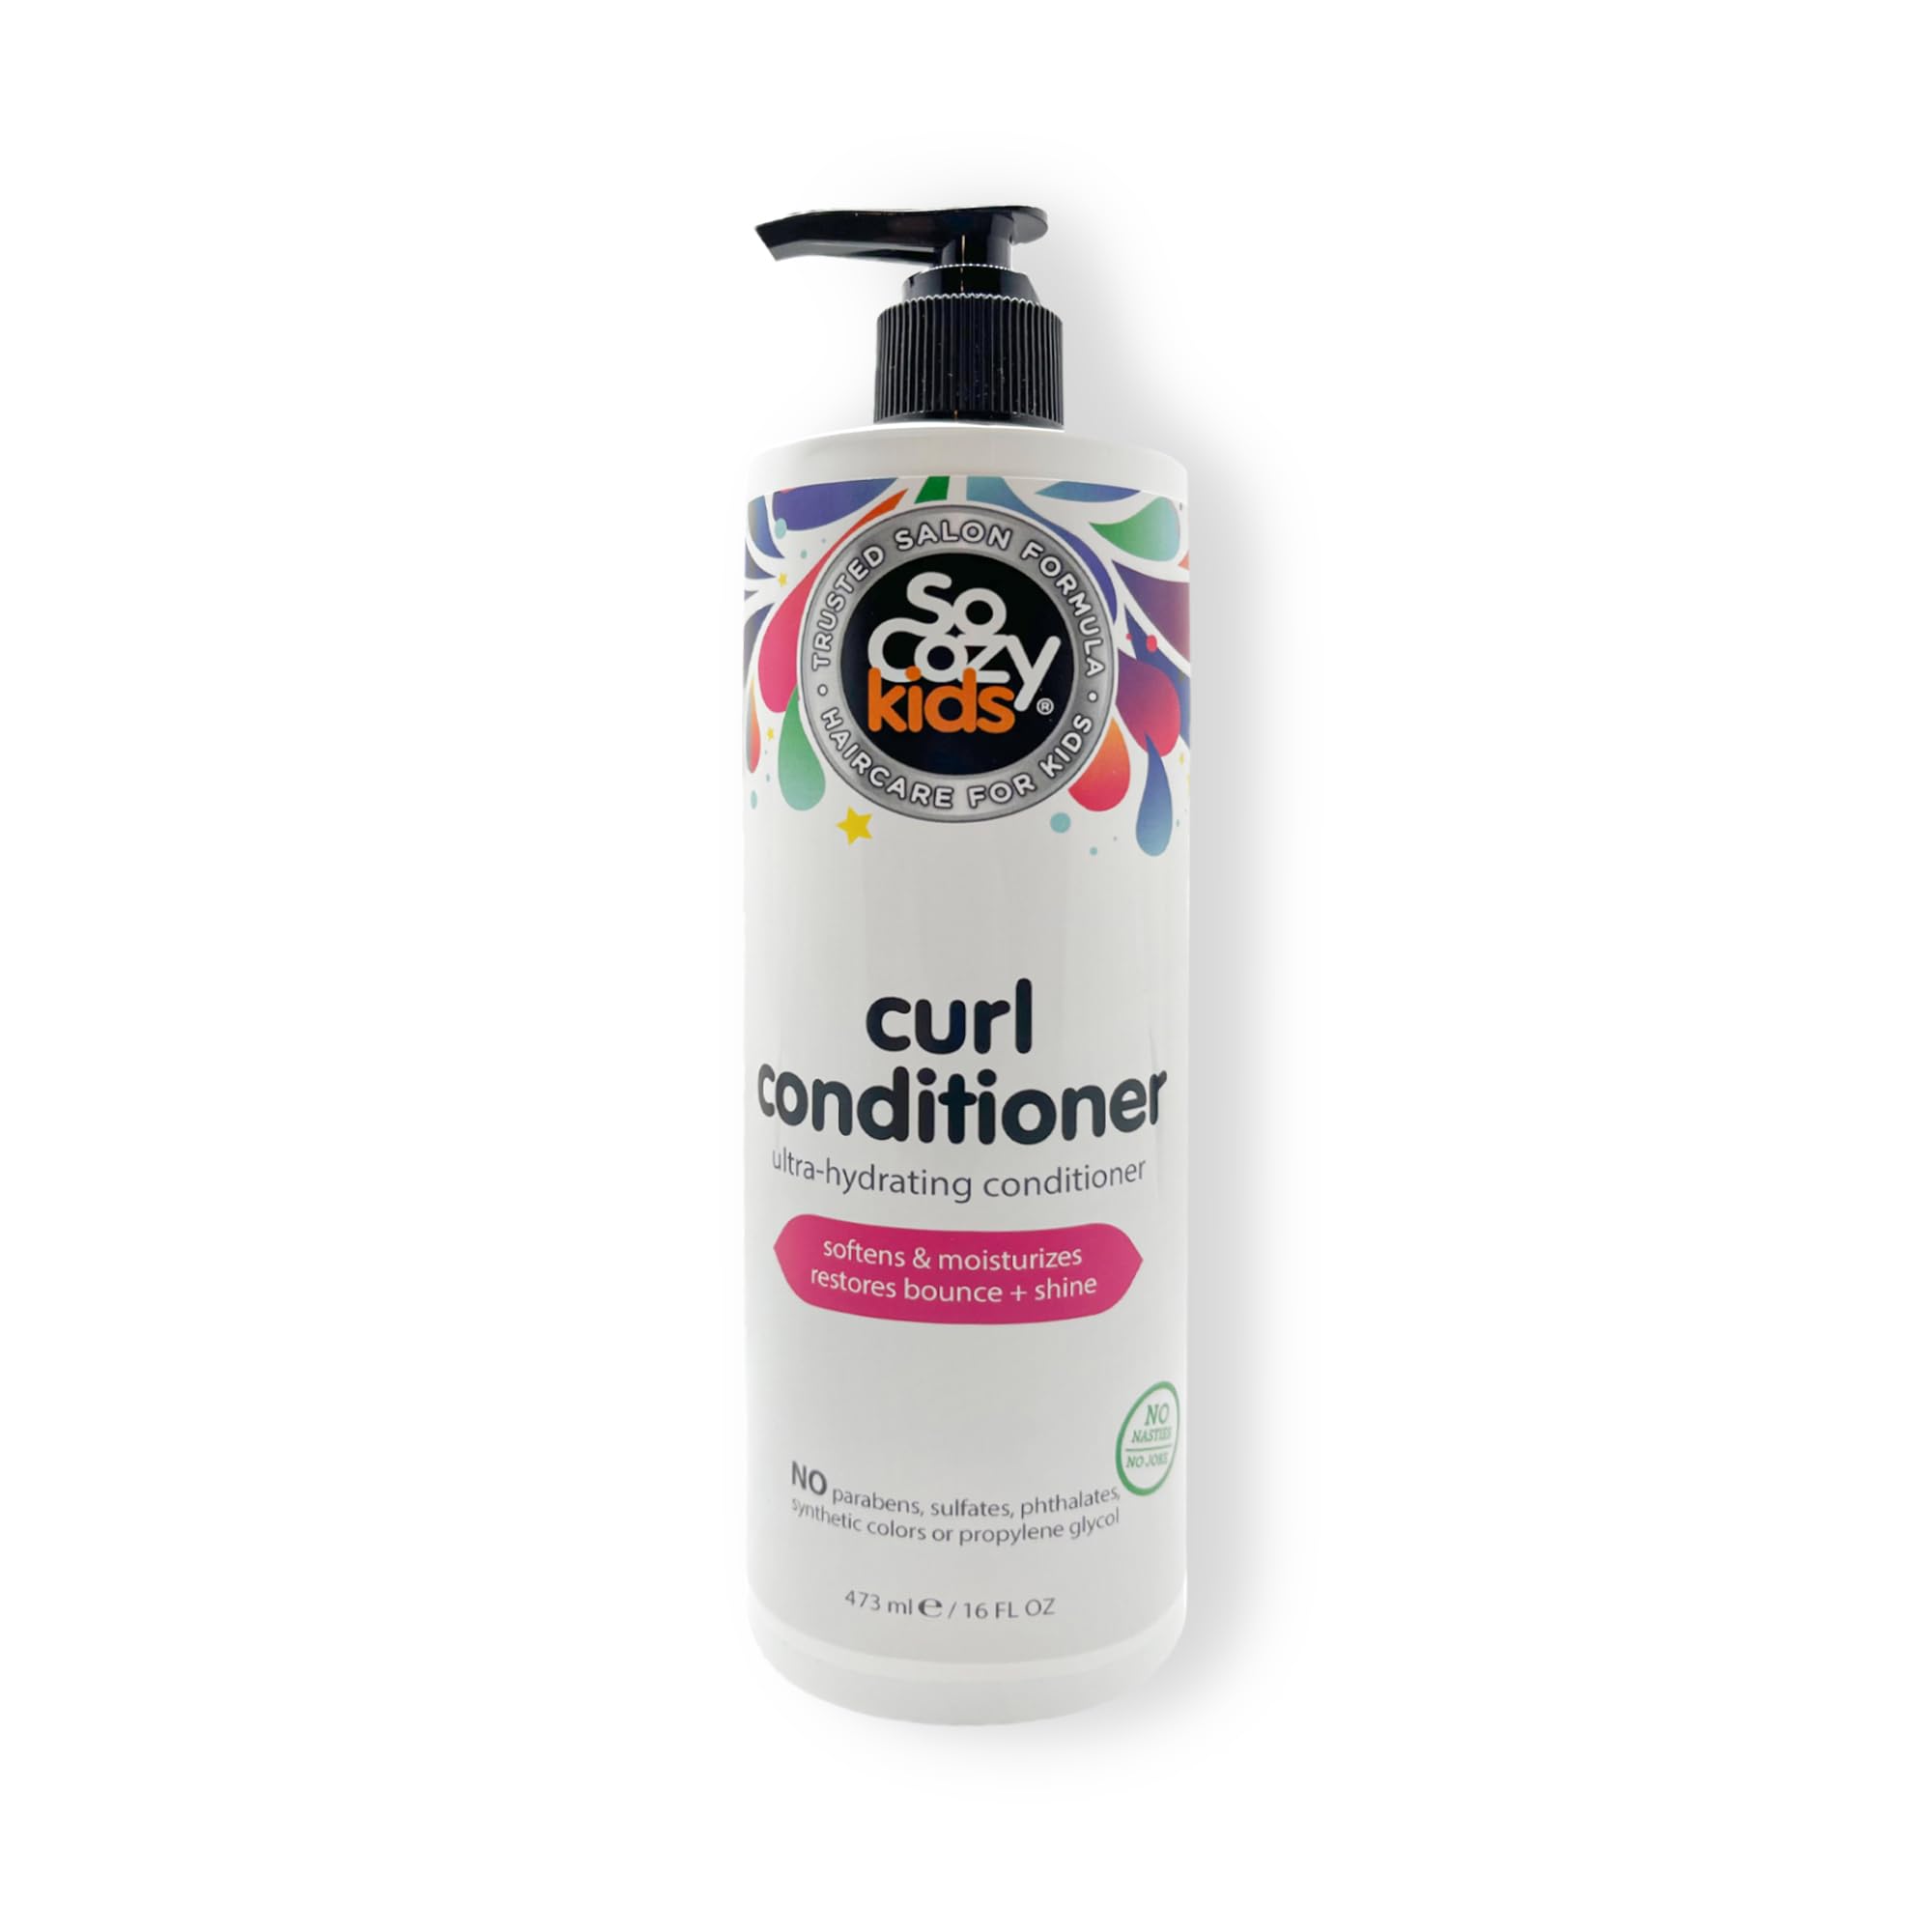 So Cozy Curl Conditioner - For Kids Hair Softens, Restores Bounce and Shine No Parabens, Sulfates, Synthetic Colors or Dyes, Sweet-Crème - 16oz Pump